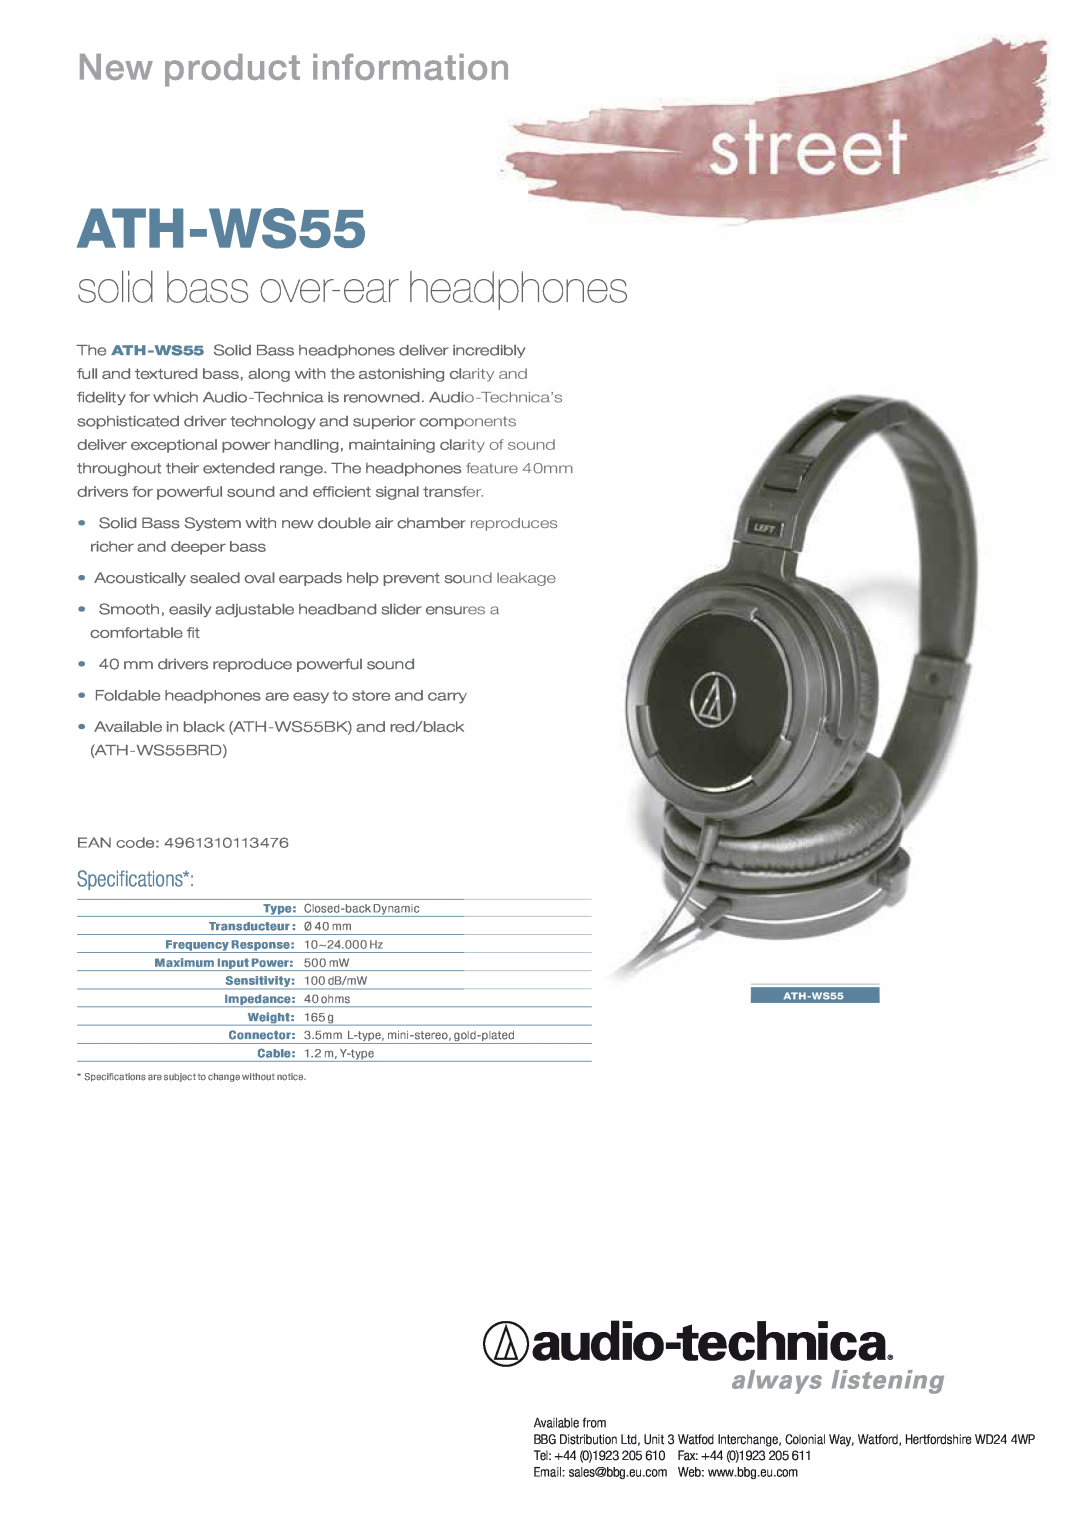 Audio-Technica ATH-WS55BK specifications solid bass over-earheadphones, New product information, Speciﬁcations 